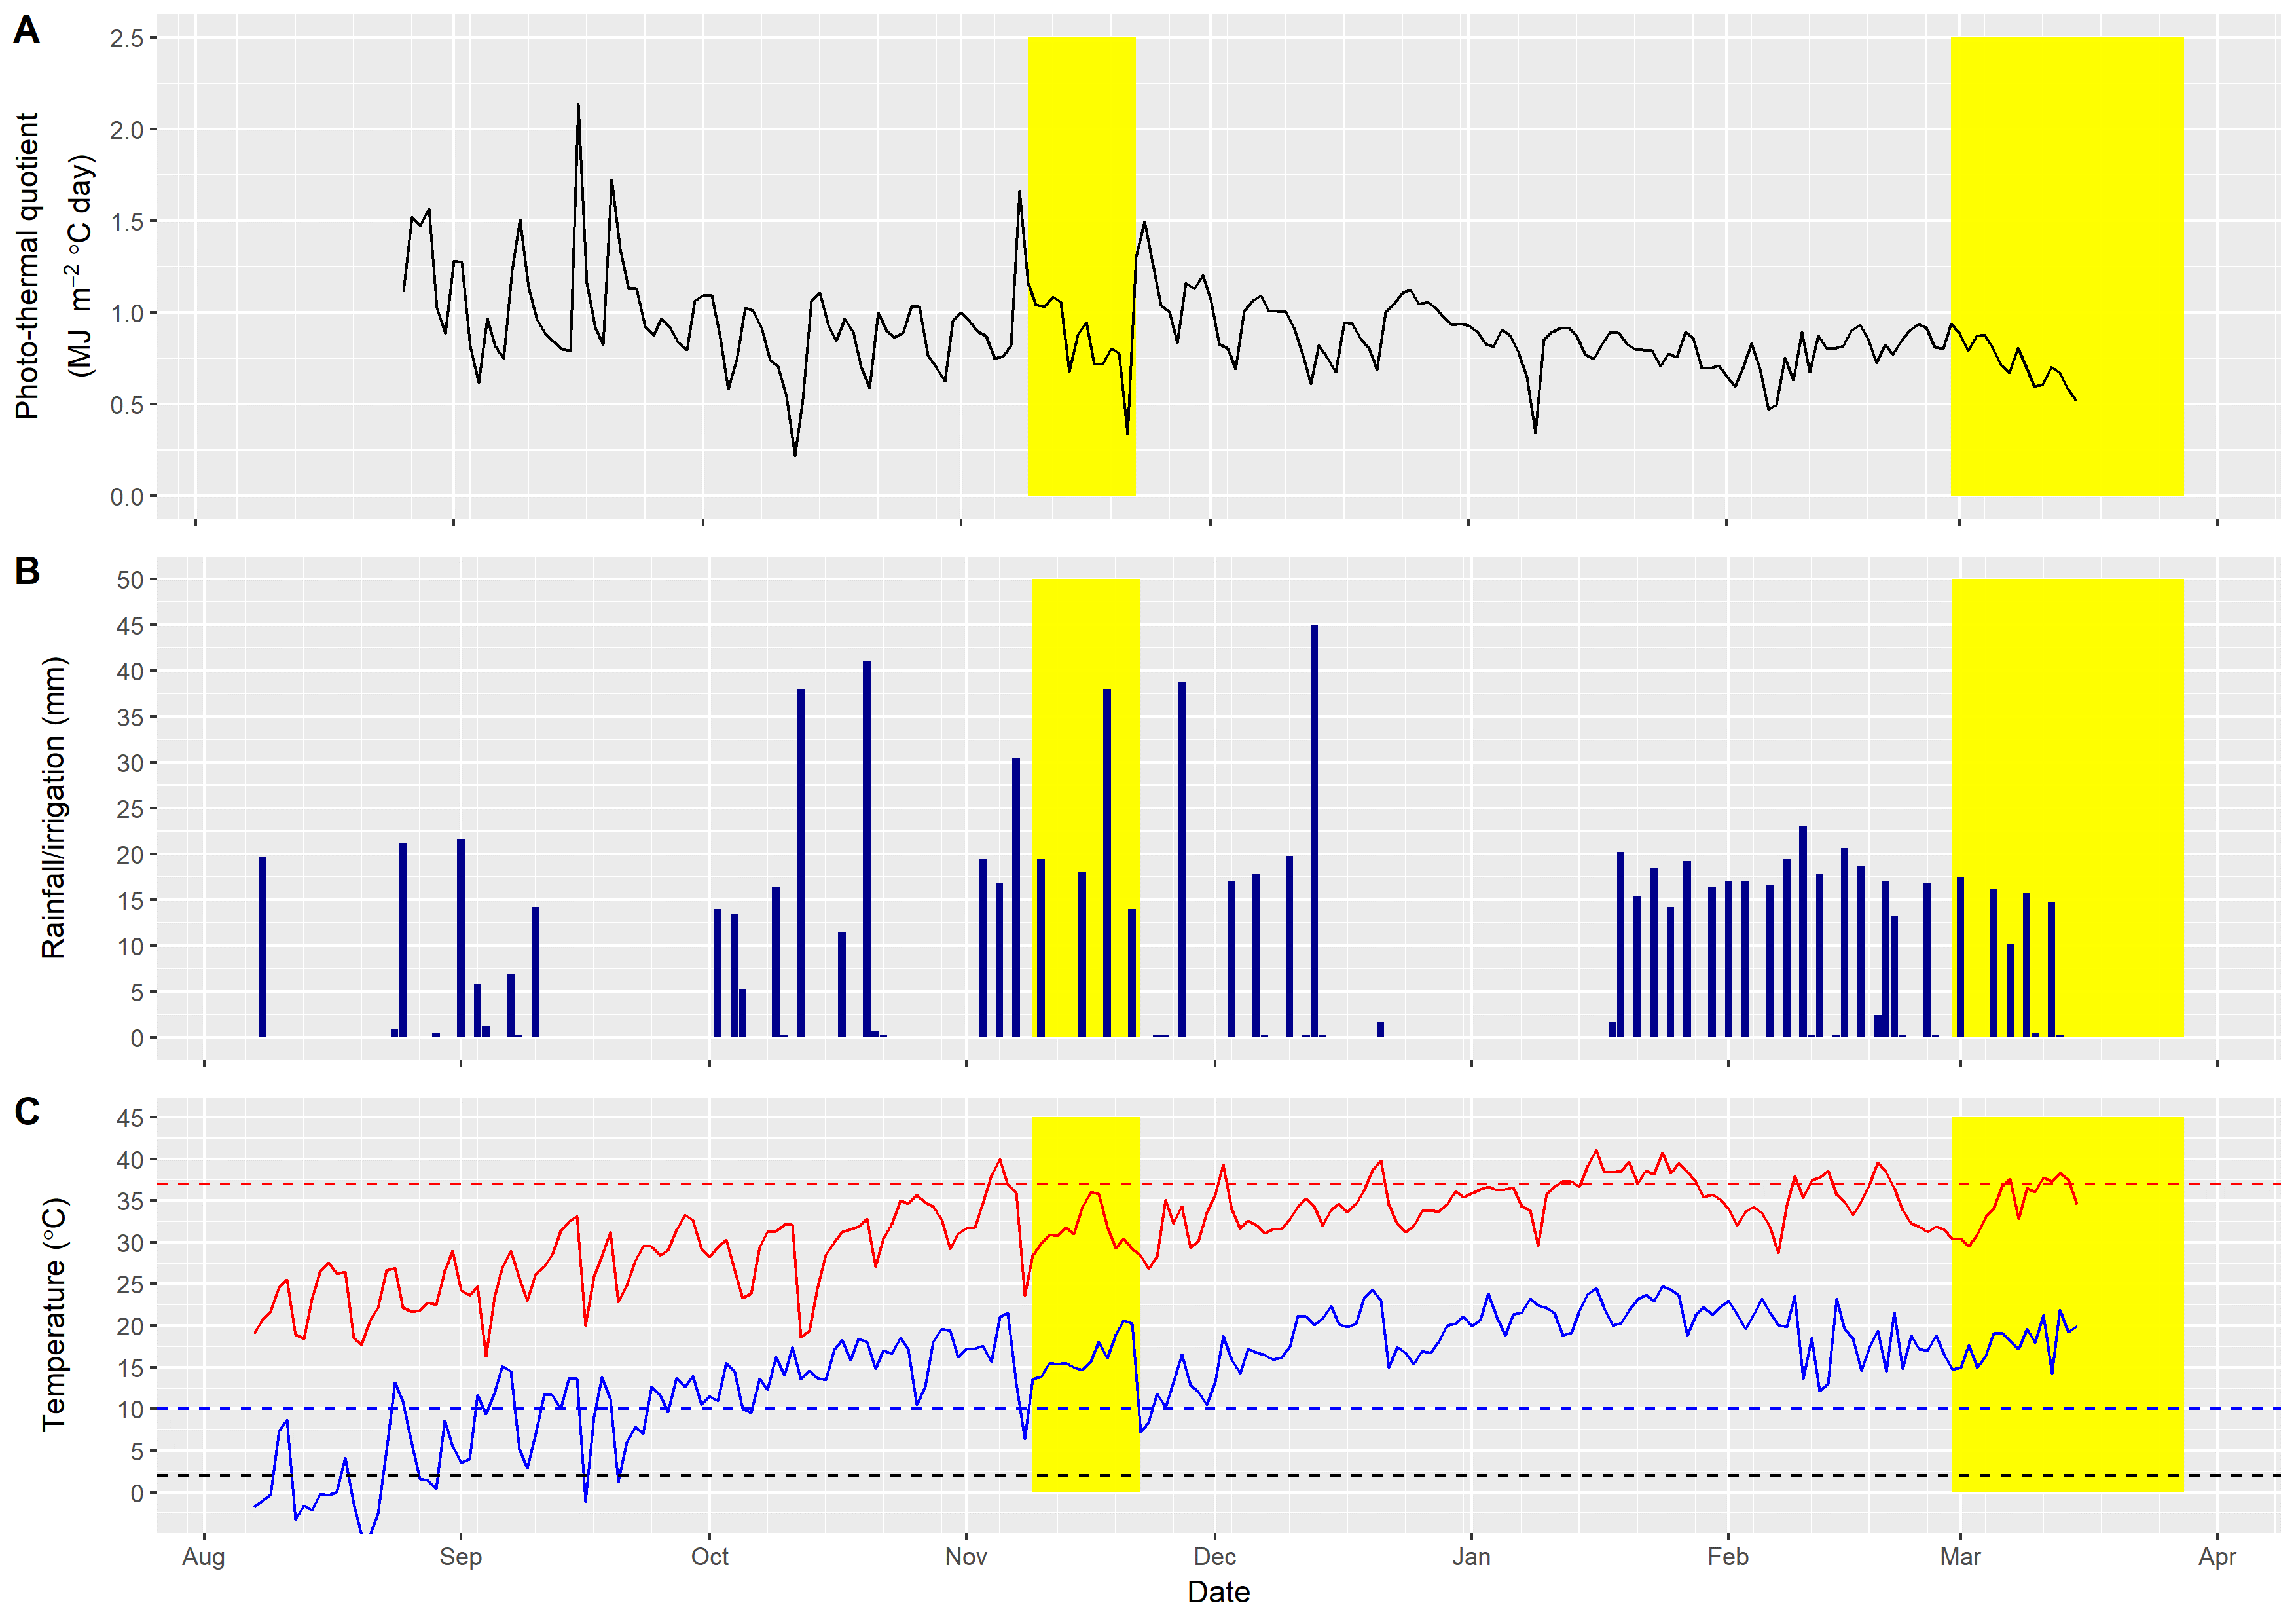 These three graphs show the photothermal quotient (A), rainfall (B) and ambient temperatures (C) at Surat, Qld for the 2018-2019 summer cropping season. The two yellow rectangles indicate the overlapping flowering timing for the 8th and 28th August 2018 sowing dates and 24th January and ratoon crop flowering dates, respectively.  Solid blue and red lines represent daily maximum and minimum temperatures, respectively. Dashed horizontal represent the reported minimum (blue) and maximum (red) temperatures stress thresholds at flowering and frost (black).